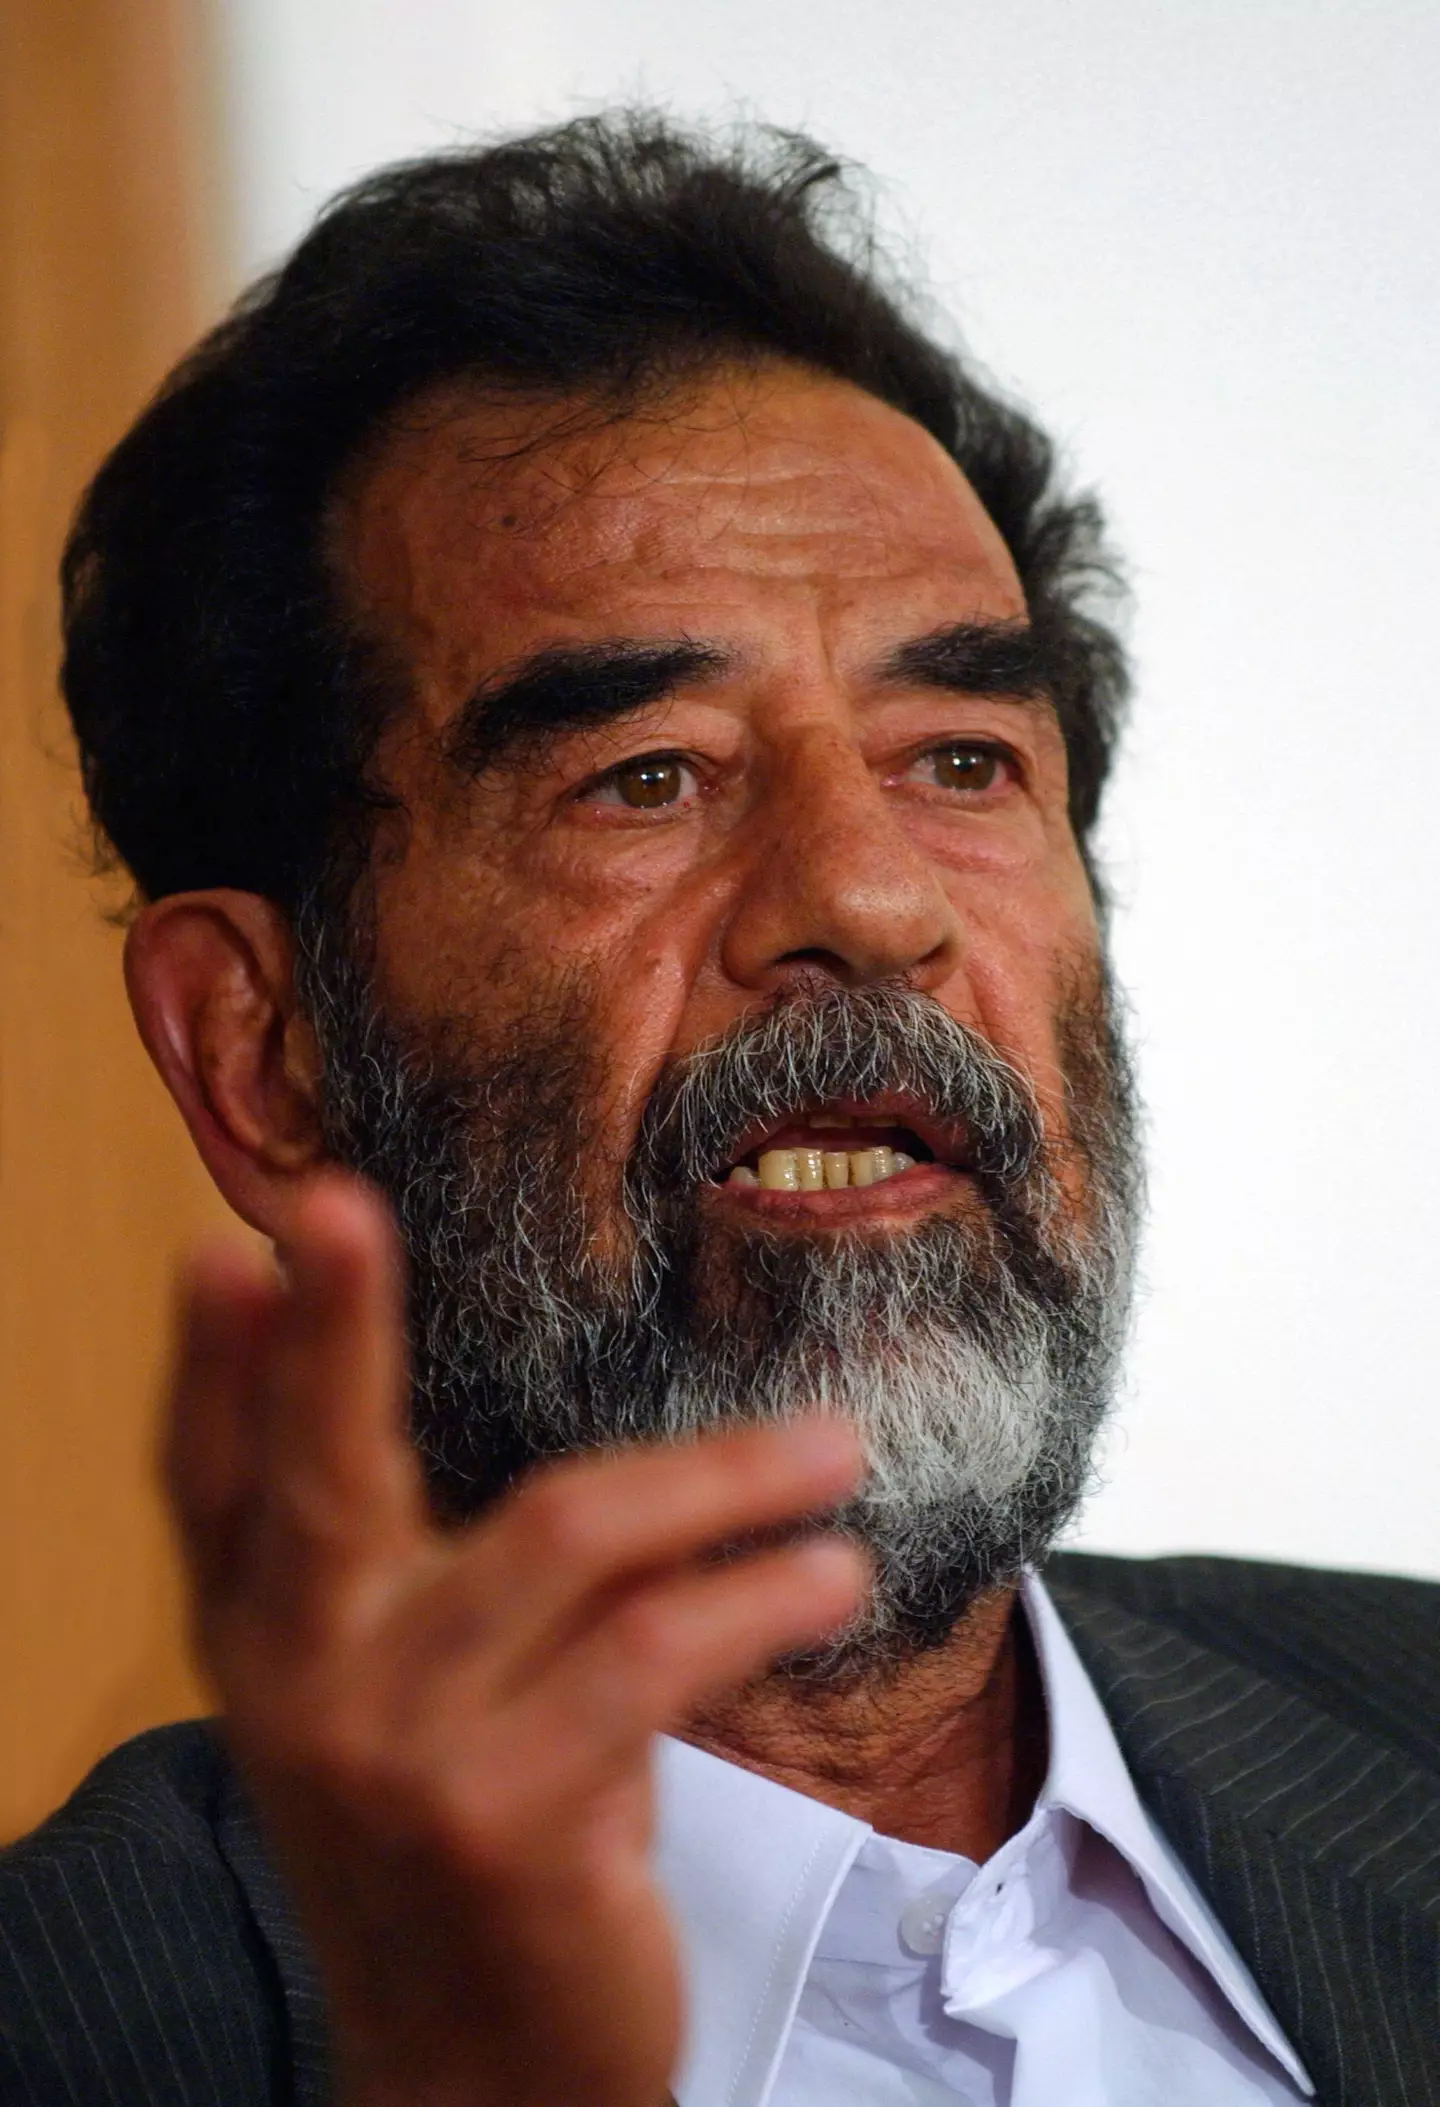 Saddam Hussein speaking at his trial in 2006.